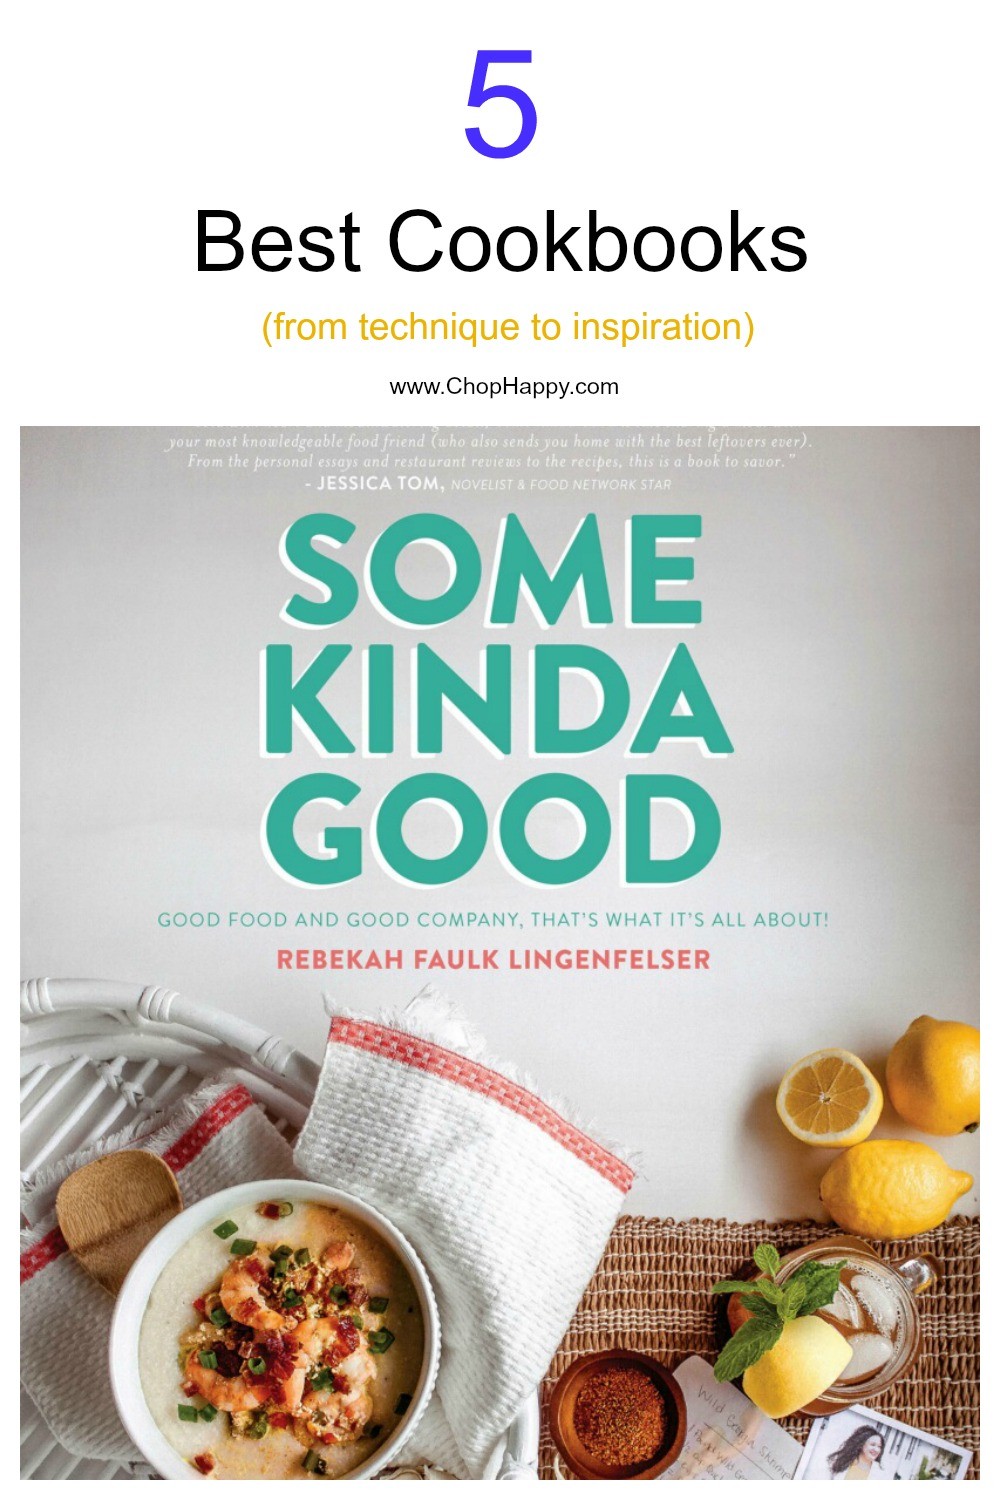 5 Best Cookbooks for inspiration and technique. Learn how to be the best home cook. These books teach you how to salt your food, make gluten free southern food, and inspire. These are my favorite cookbooks. www.ChopHappy.com #cookbooks #BestCookBooks